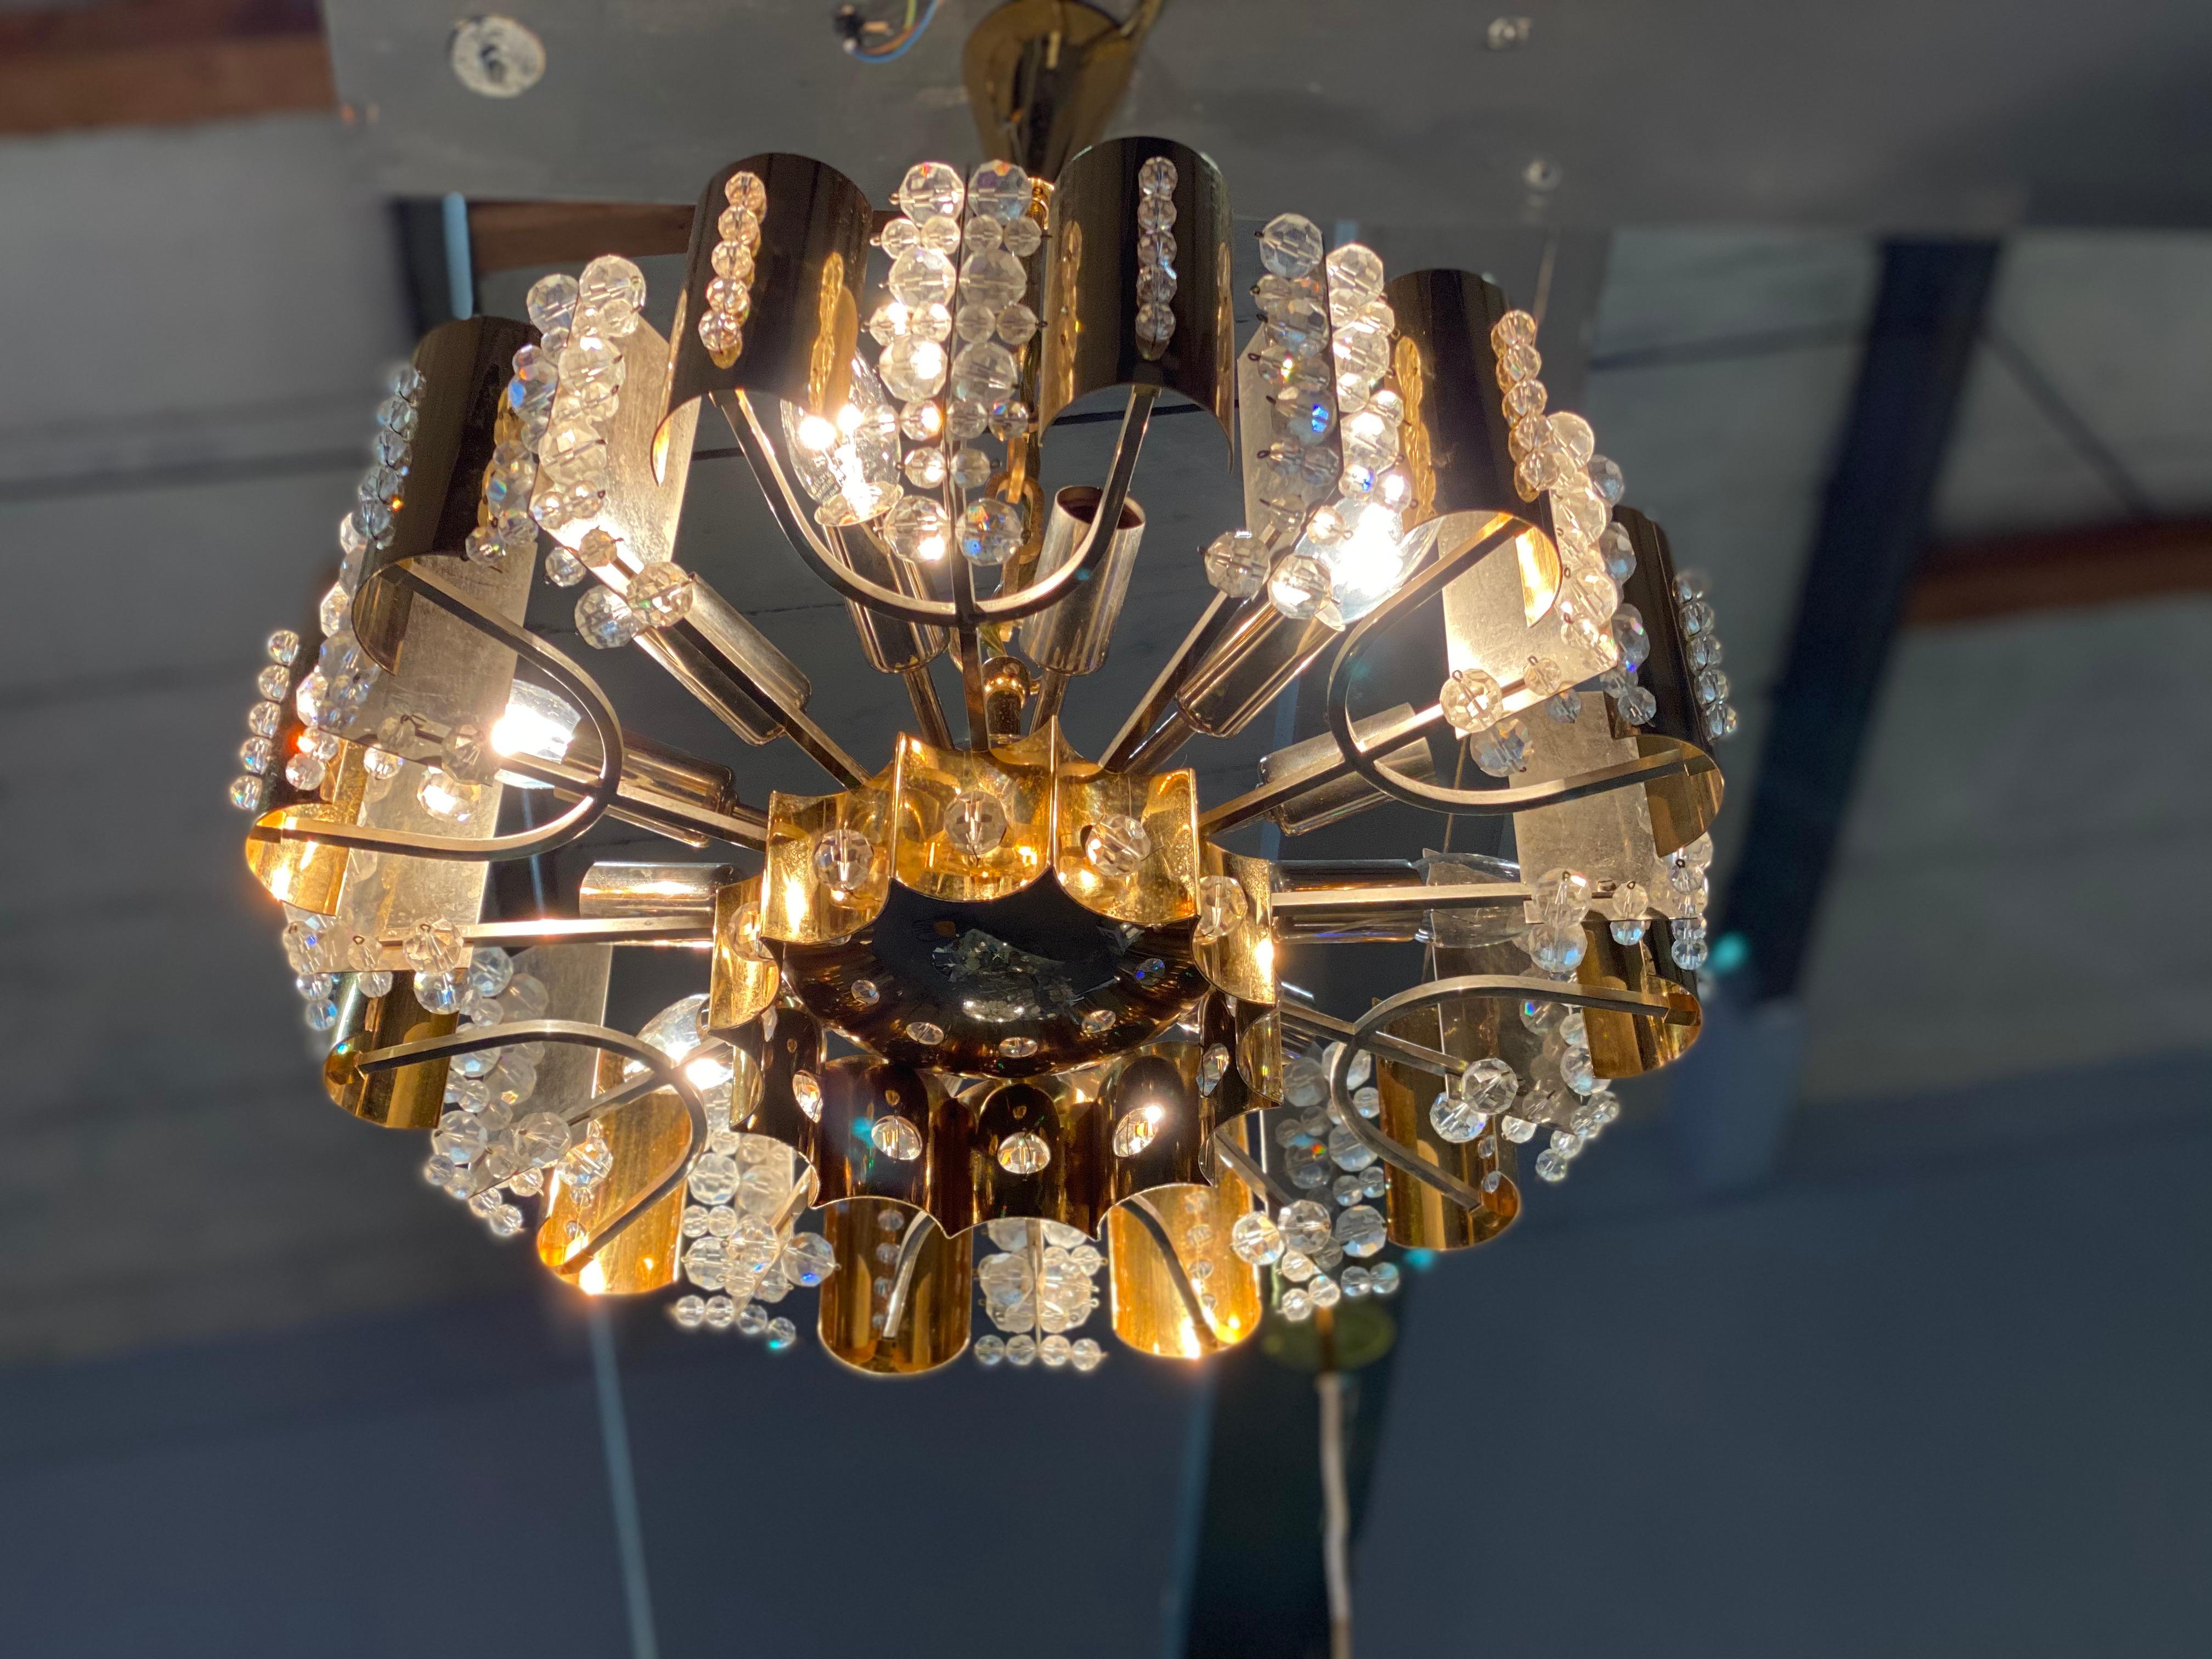 This gilded brass chandelier with its design and many crystal stones can be attributed to the manufacturer Palwa and the 1960s.

Palwa is composed of the names Palme and Walter. The company was founded by two German families and grew rapidly in